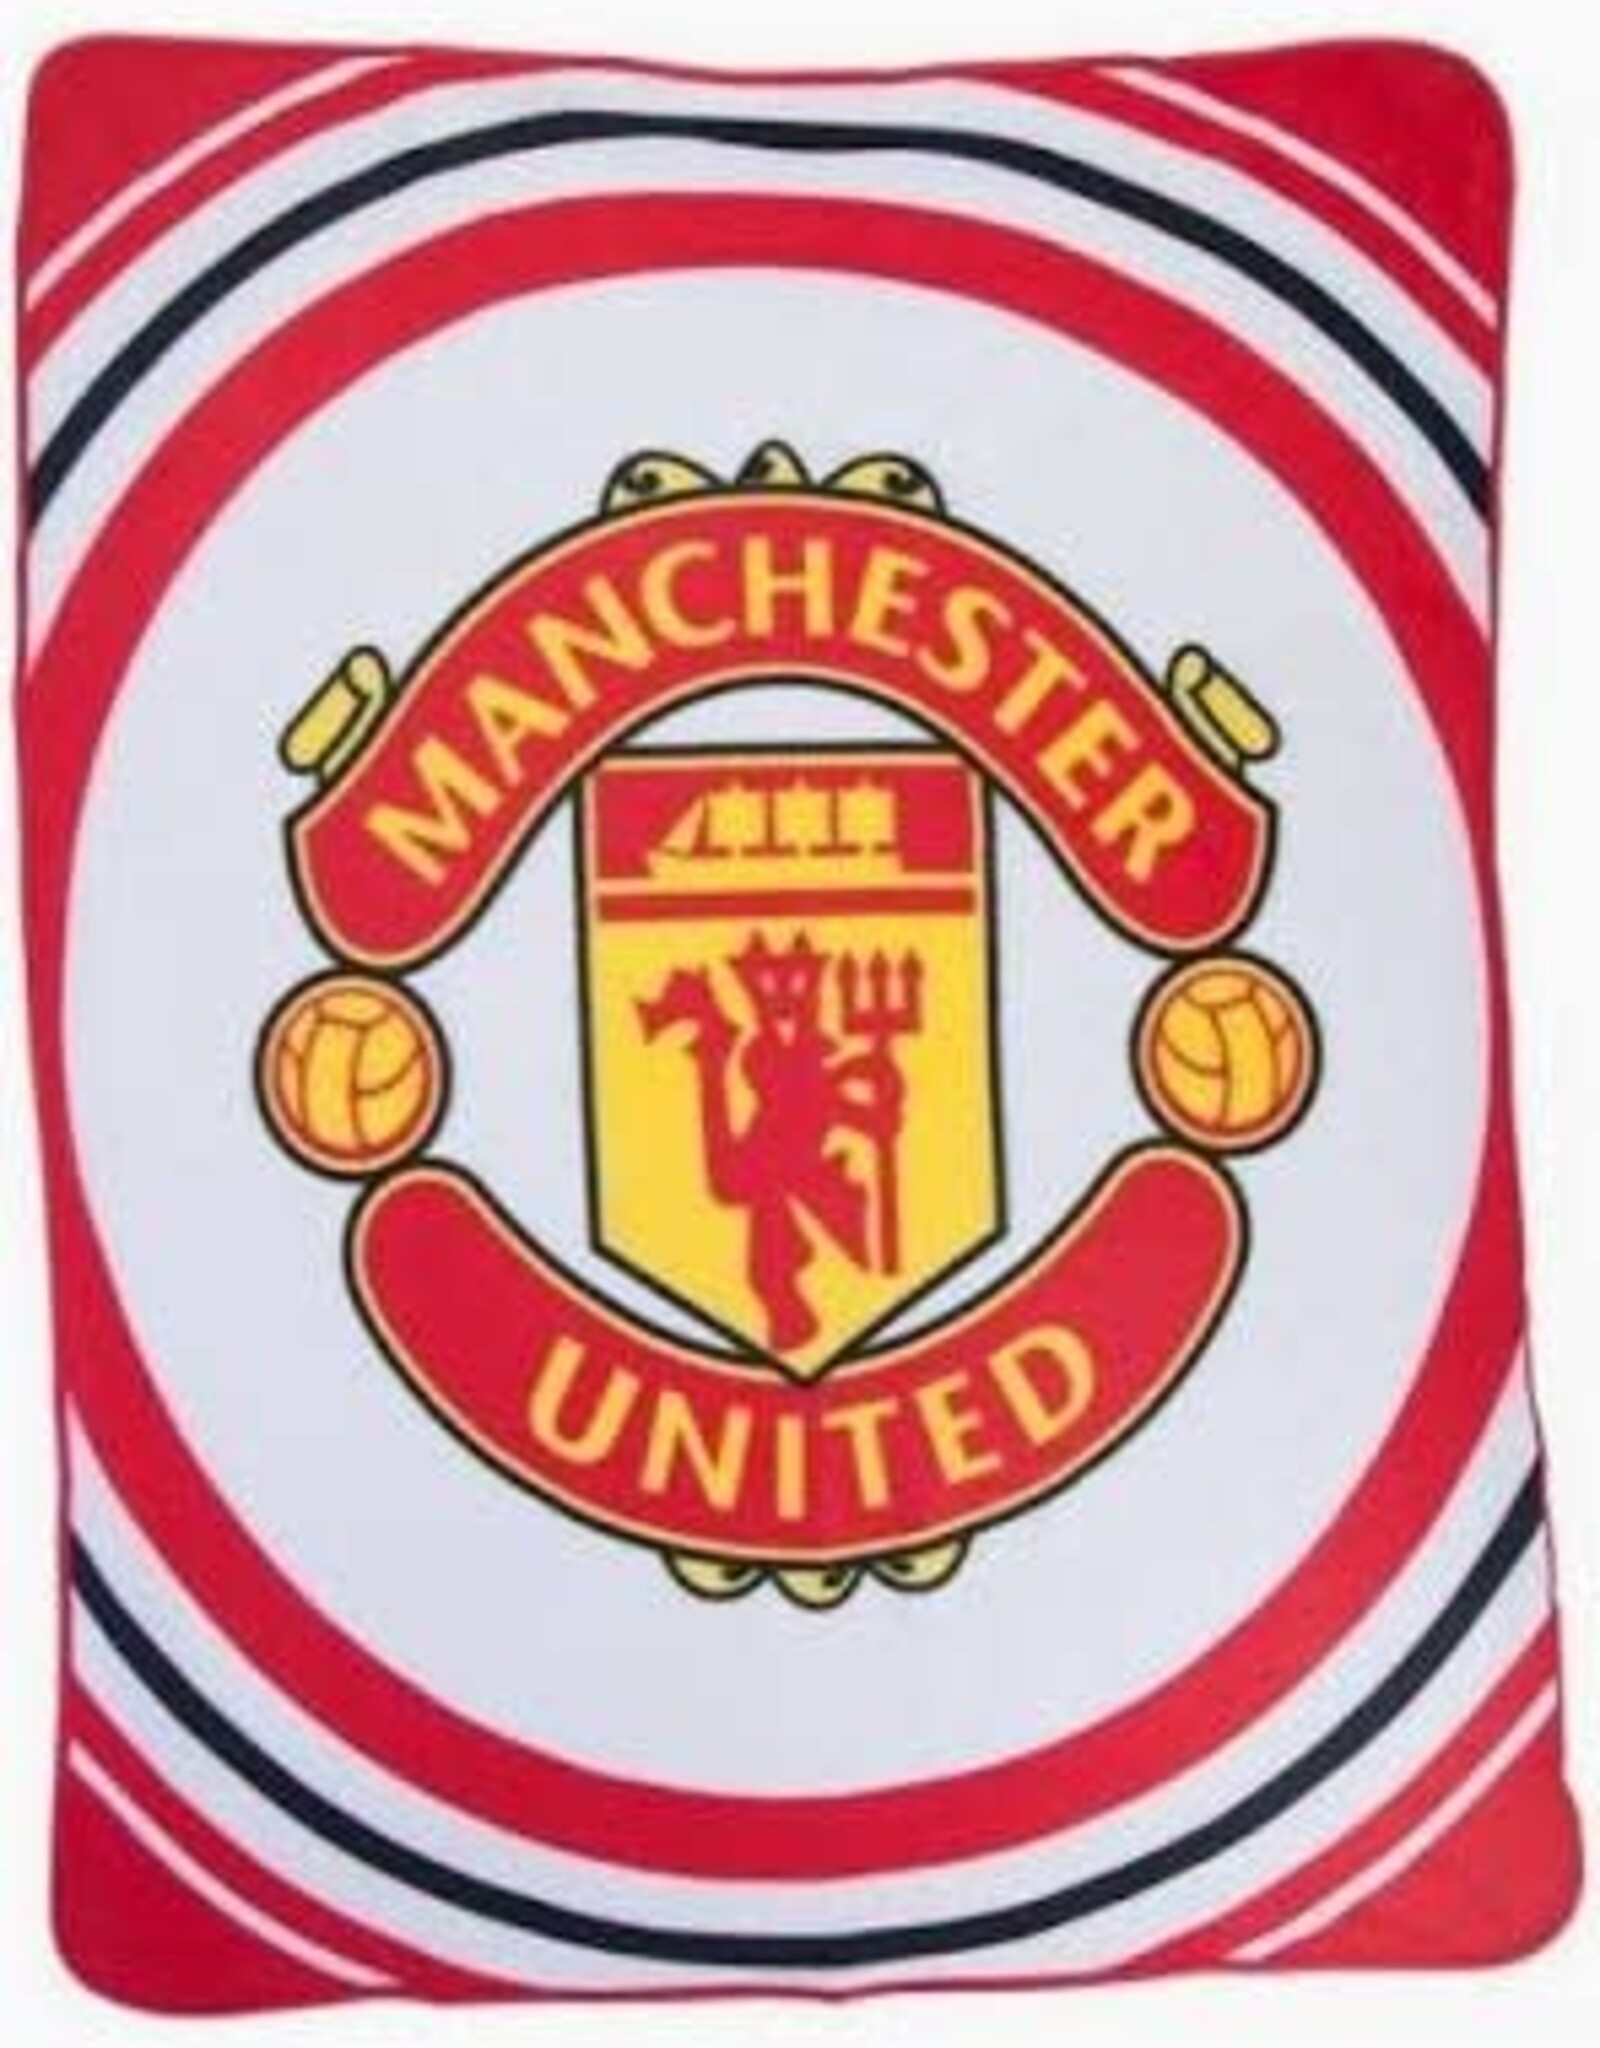 Oracle Trading Manchester United Fleece Blanket